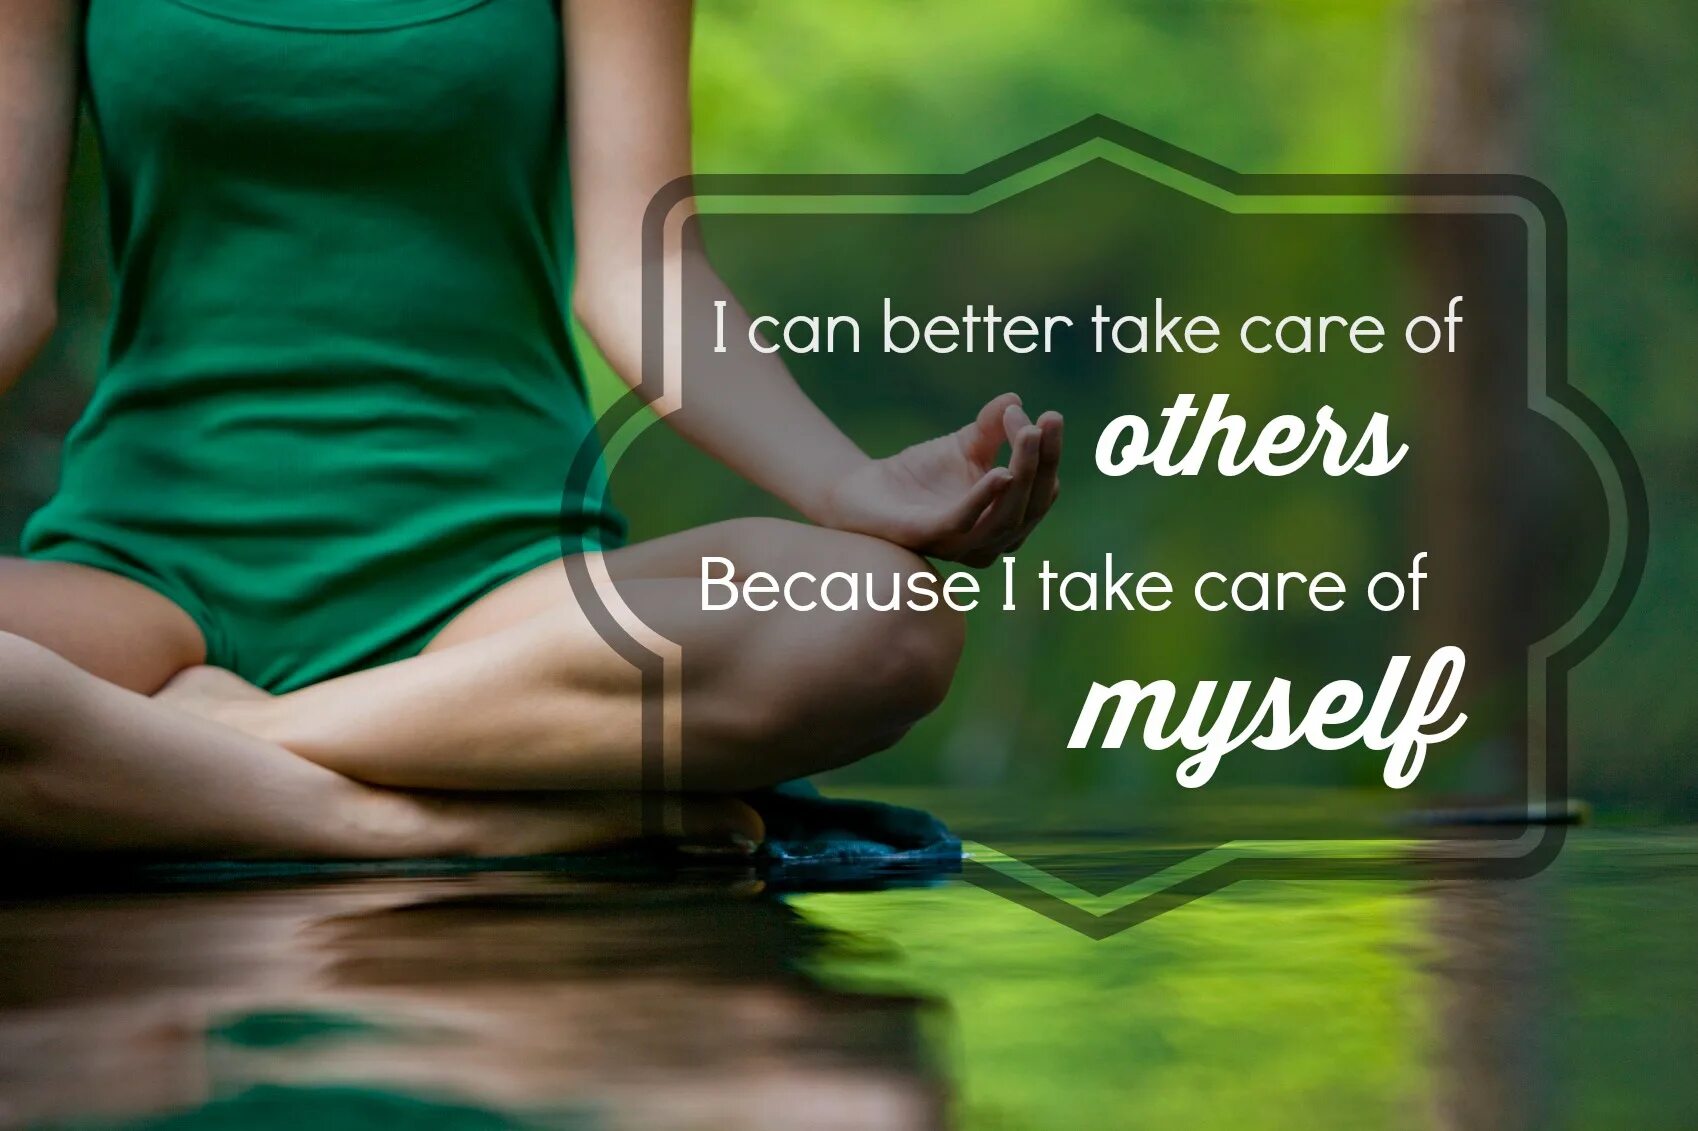 Self Care. Self Care картинки. Self Care Tips. Take Care of yourself картинки. Take care of this